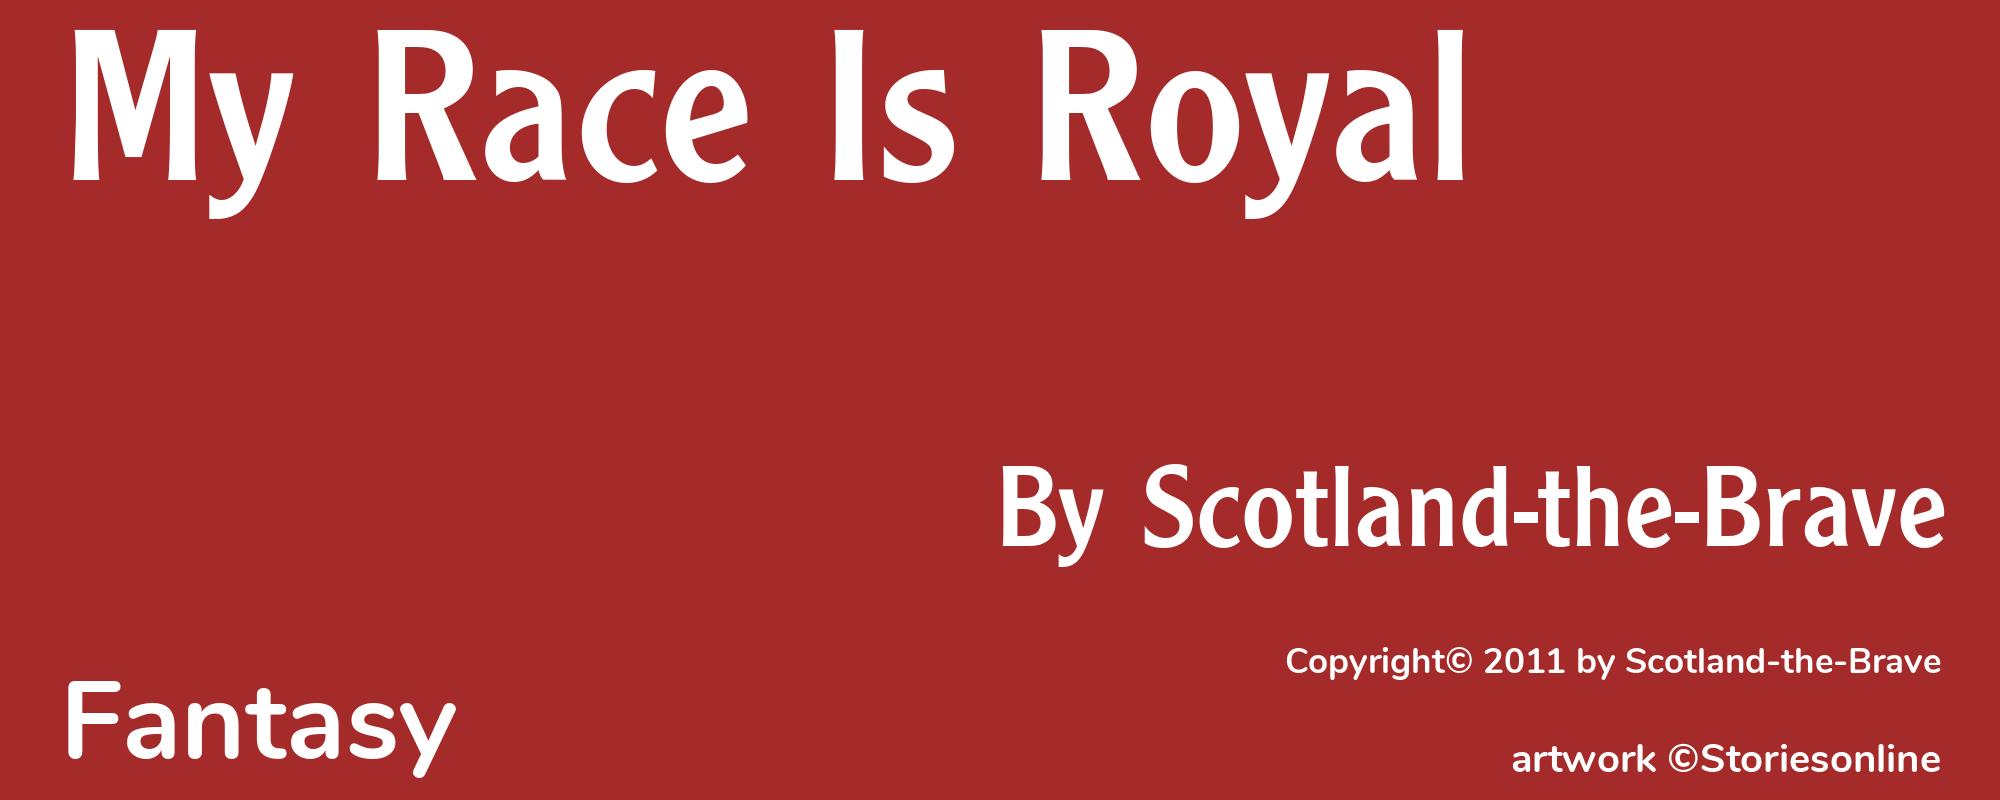 My Race Is Royal - Cover